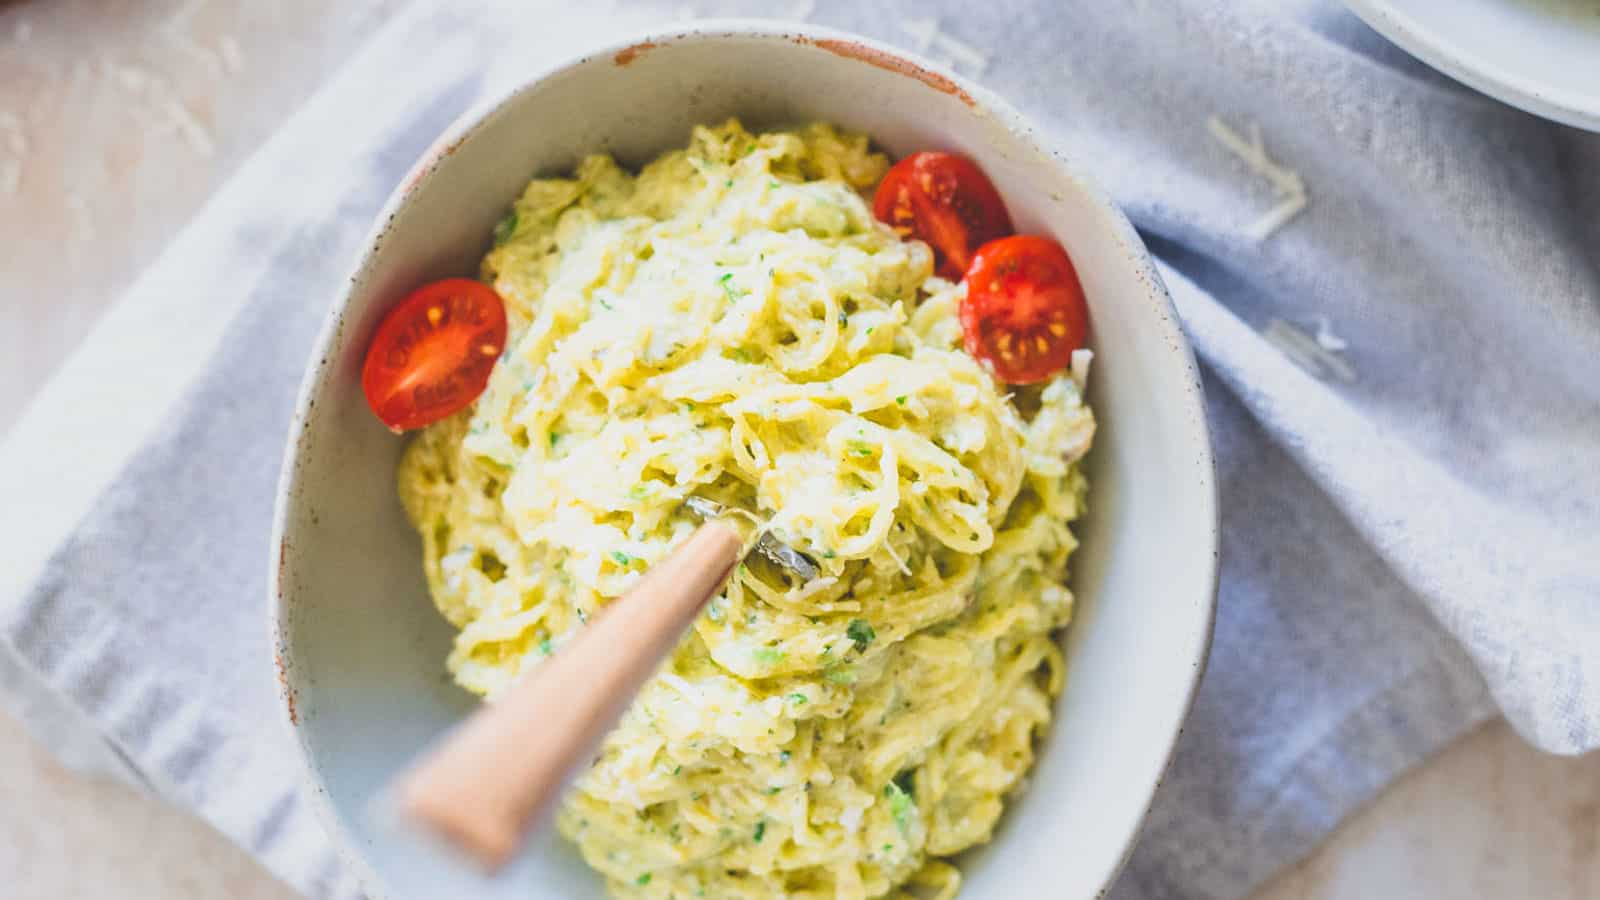 Pesto spaghetti squash noodles in a bowl with cherry tomatoes.